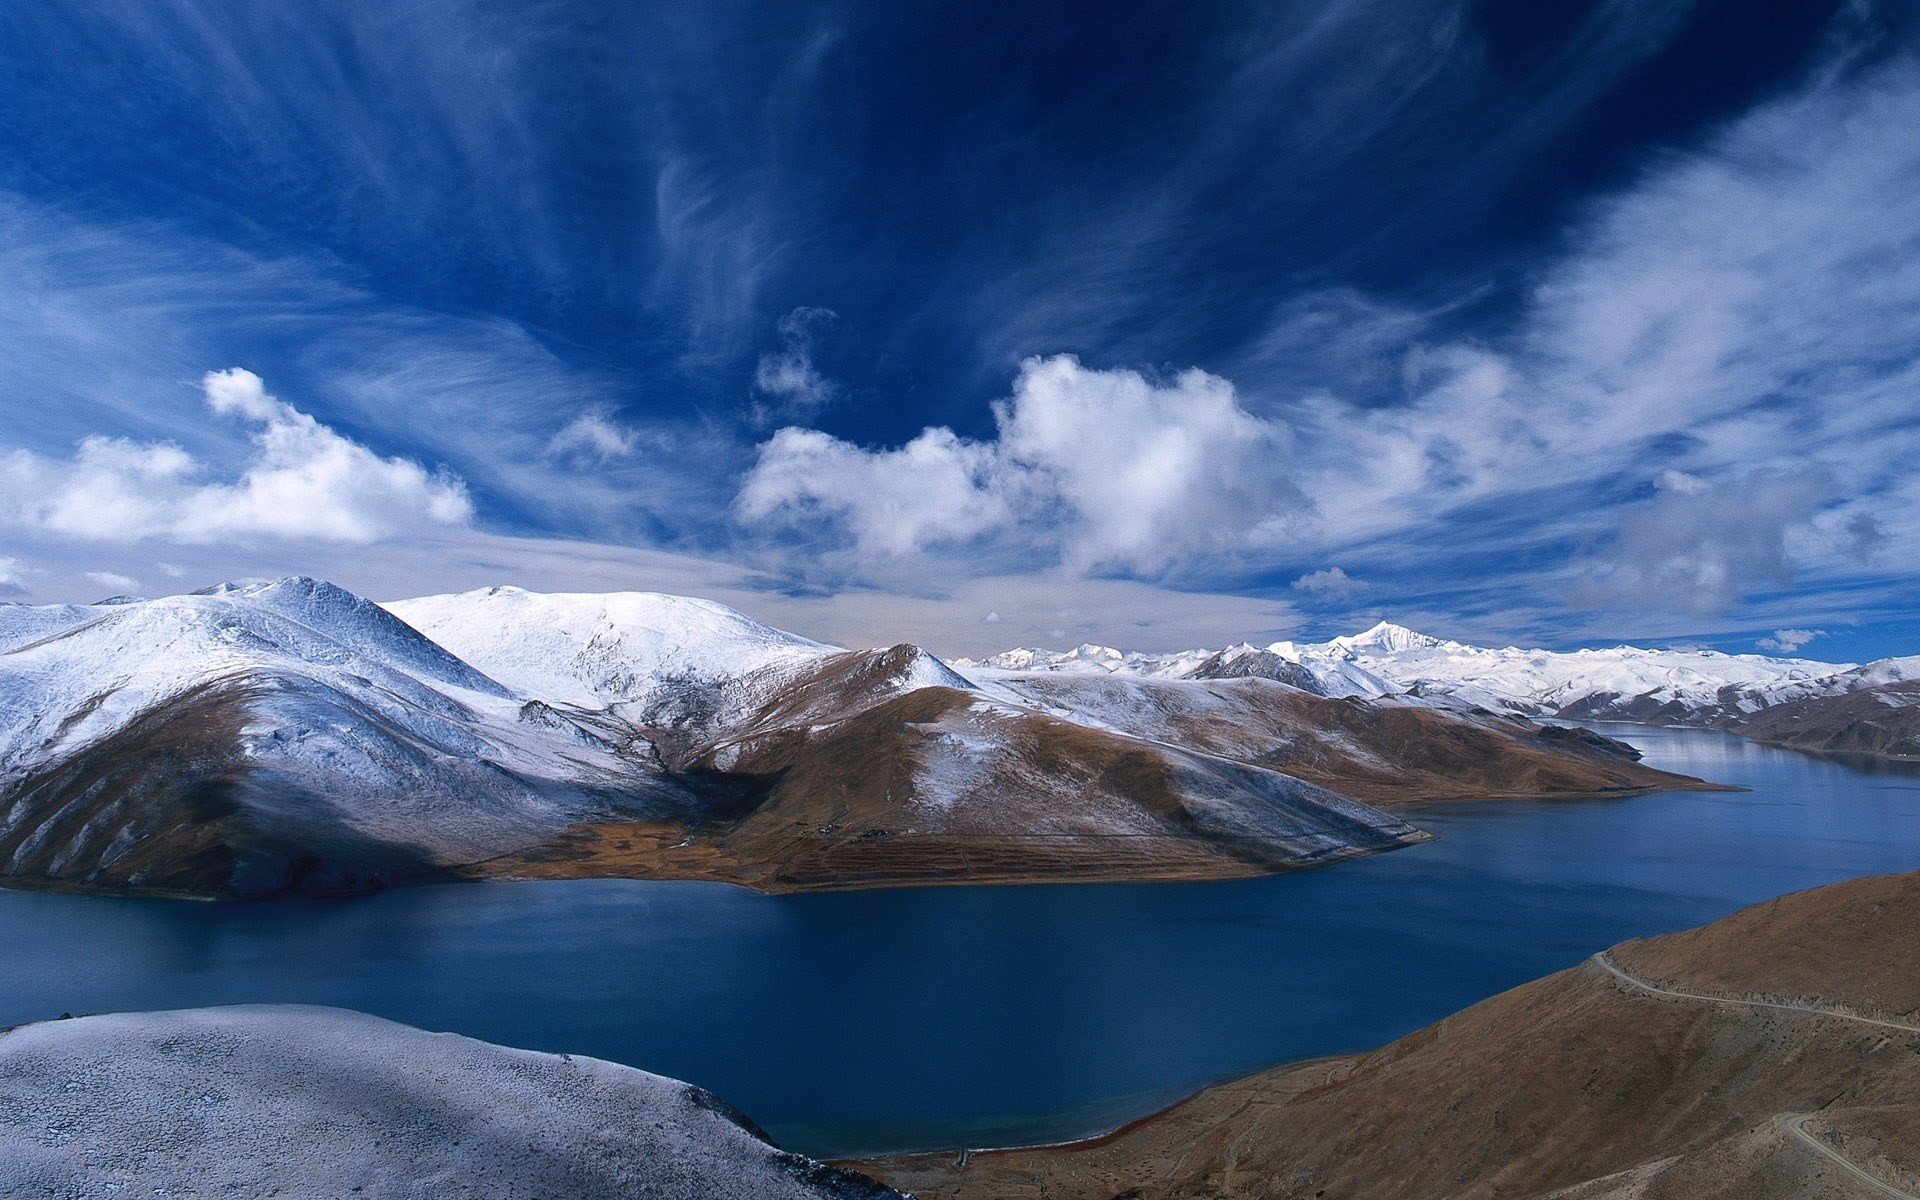 Summer Holiday Guide to Ladakh